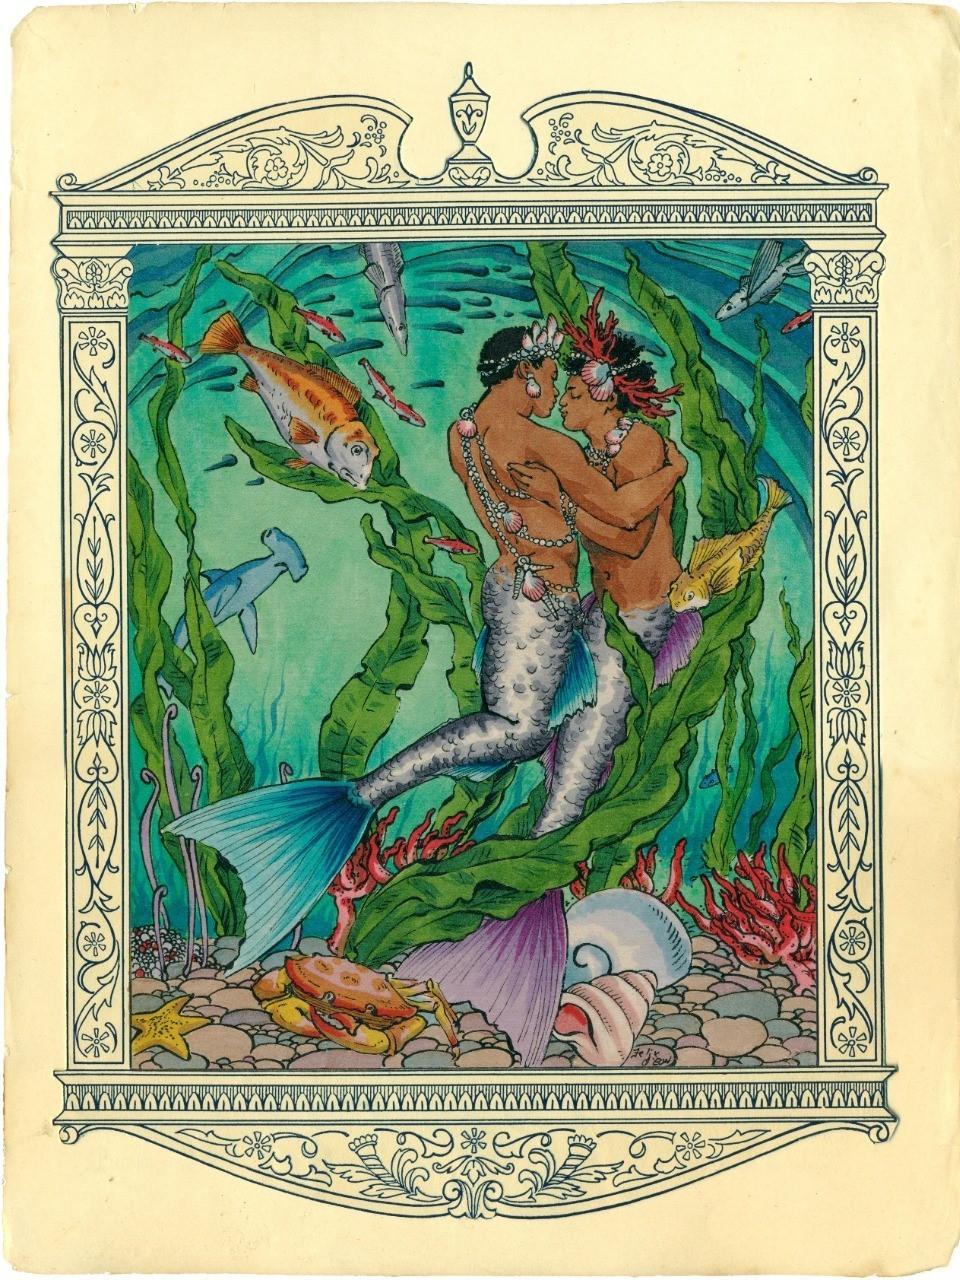 <em>Coral and Kisses</em> is one of Felix d'Eon's paintings celebrating queer love and identity using mythological beings.